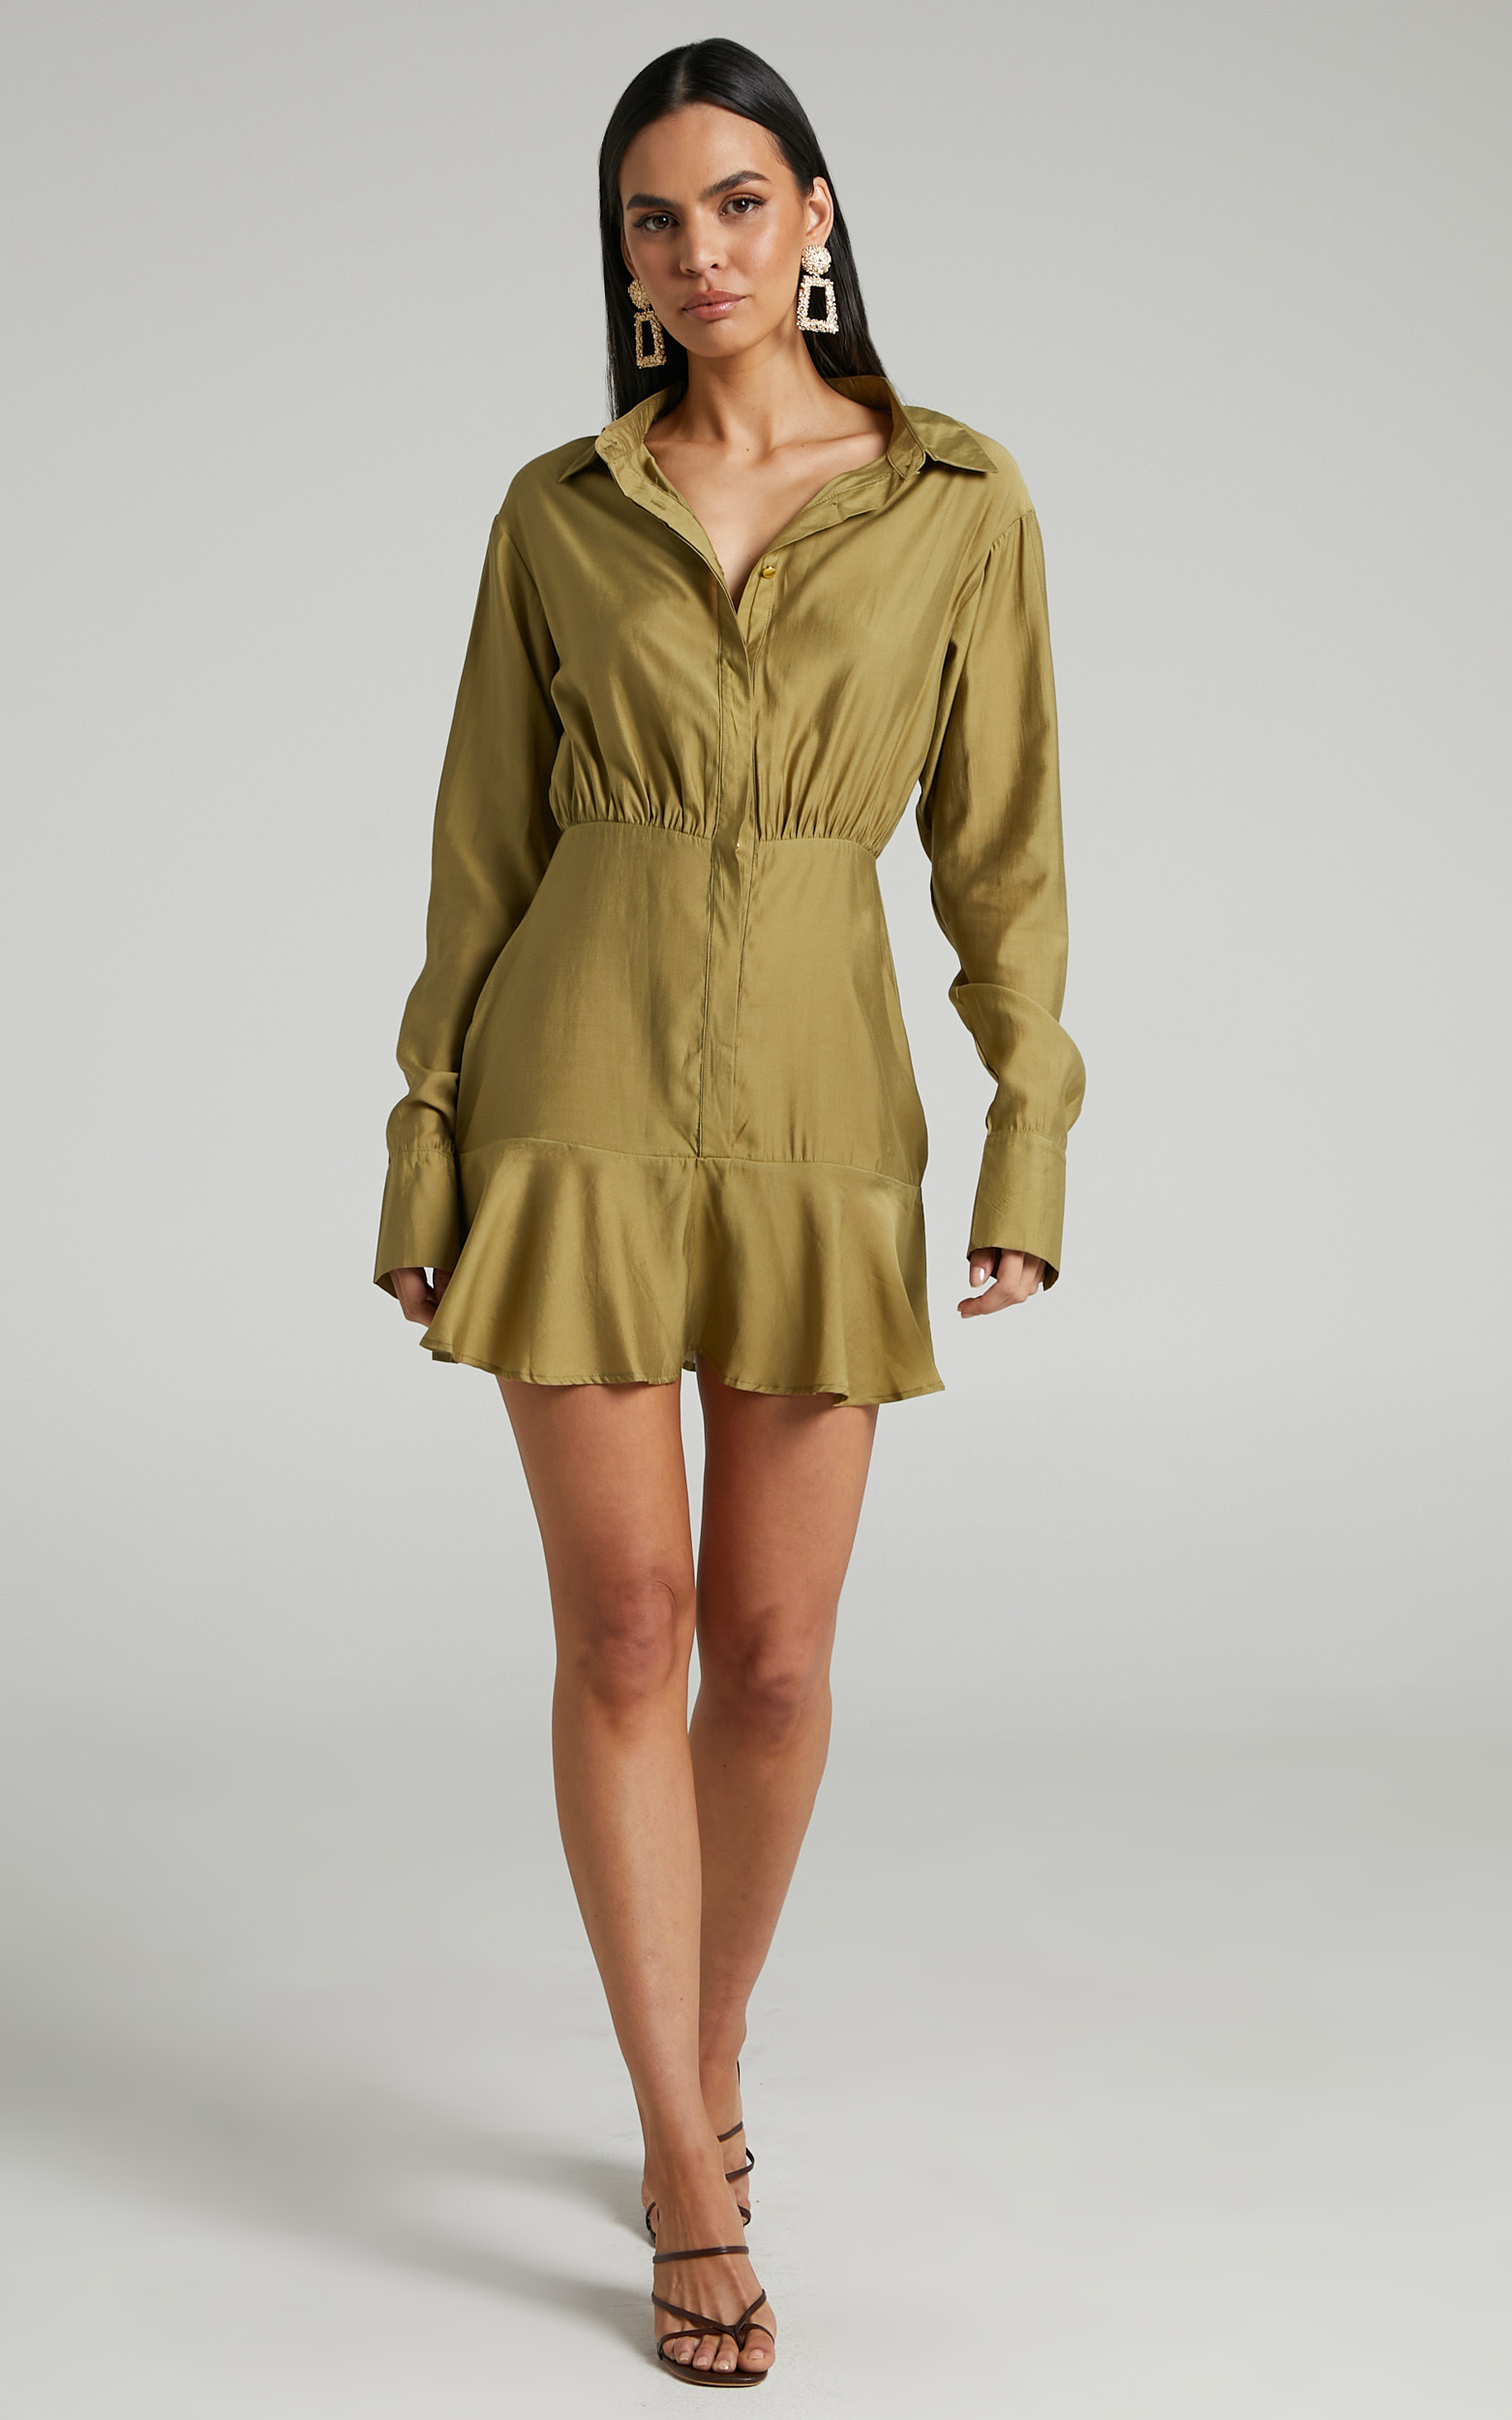 Jervin Collared Button Down Mini Shirt Dress in Khaki - 04, GRN1, hi-res image number null